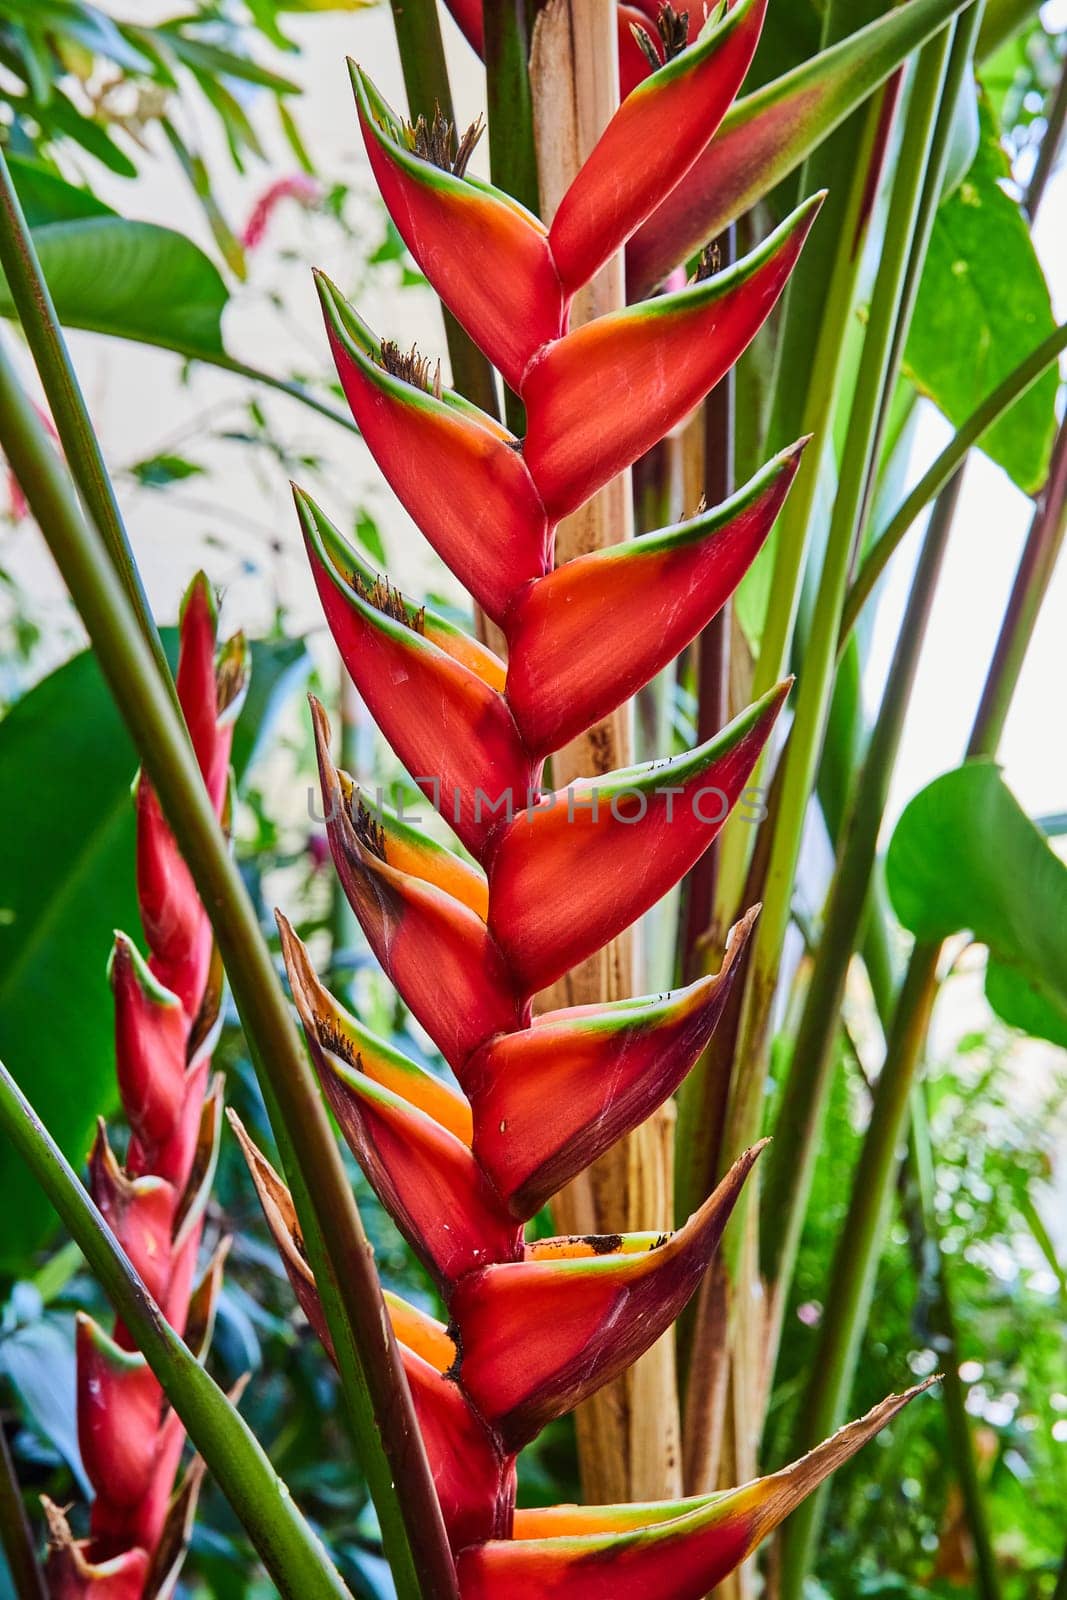 Vibrant Red Heliconia in Tropical Conservatory Setting by njproductions